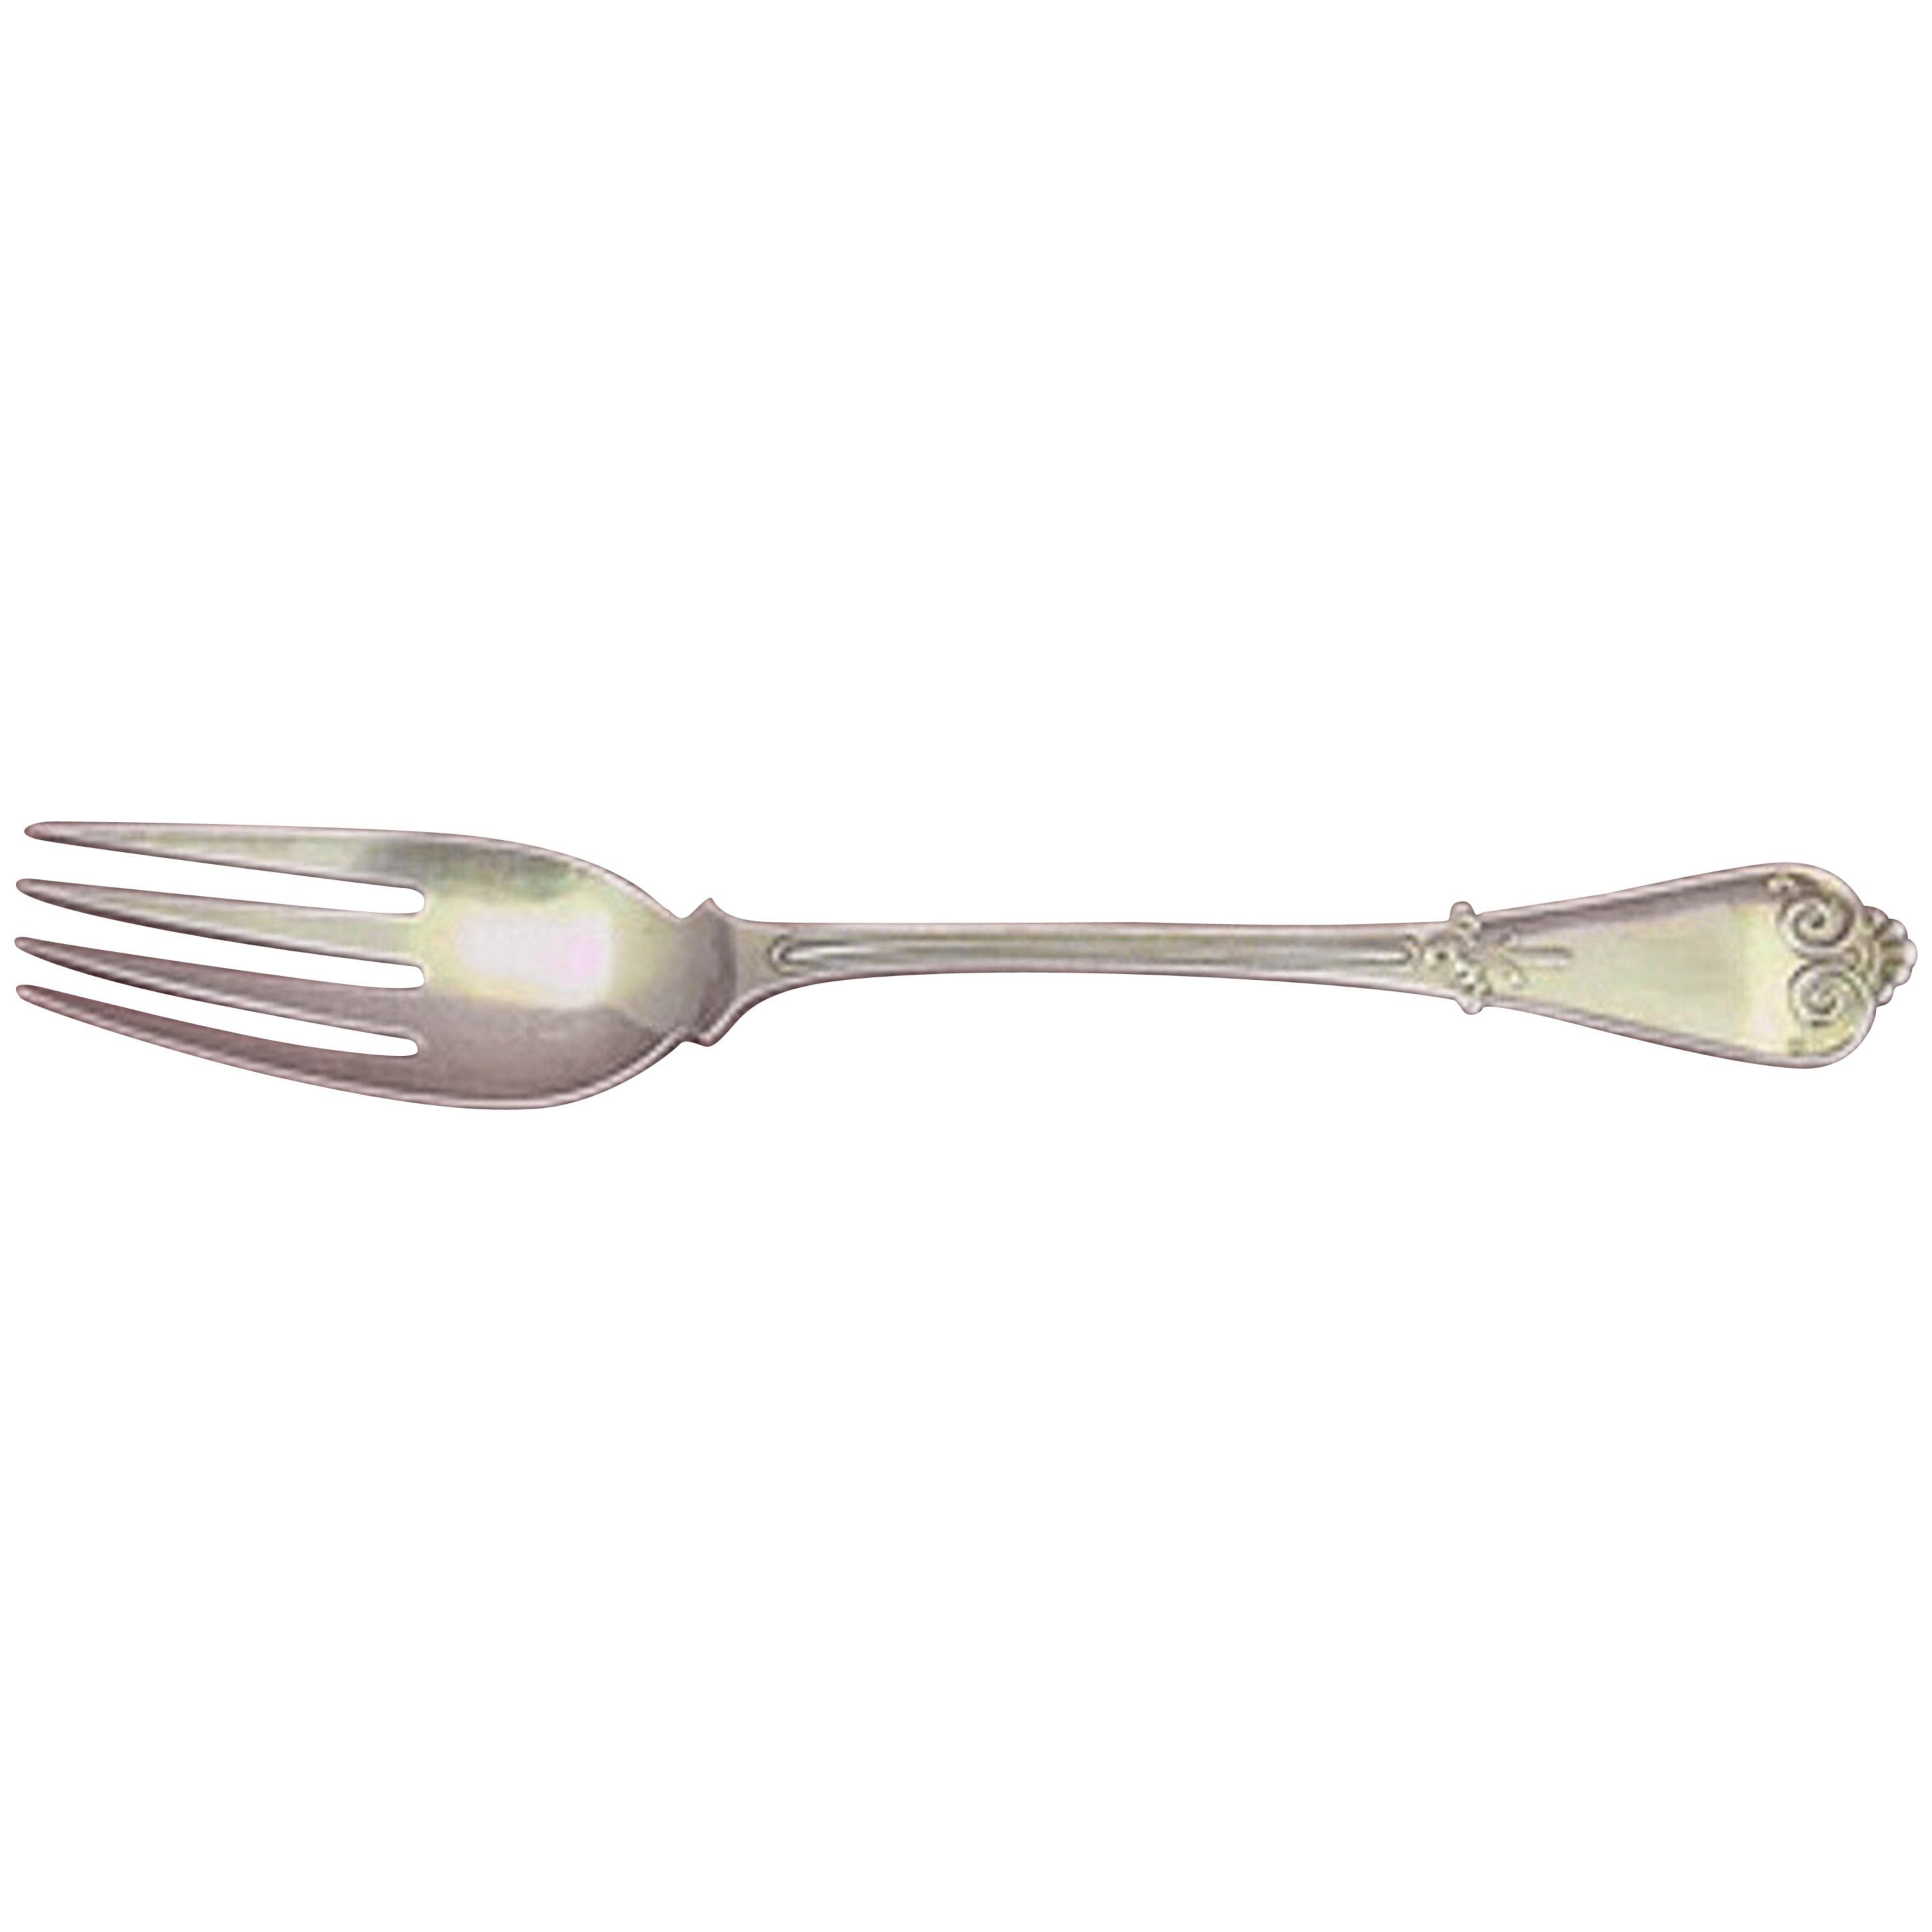 Beekman by Tiffany & Co. Sterling Silver Fish Fork, Antique